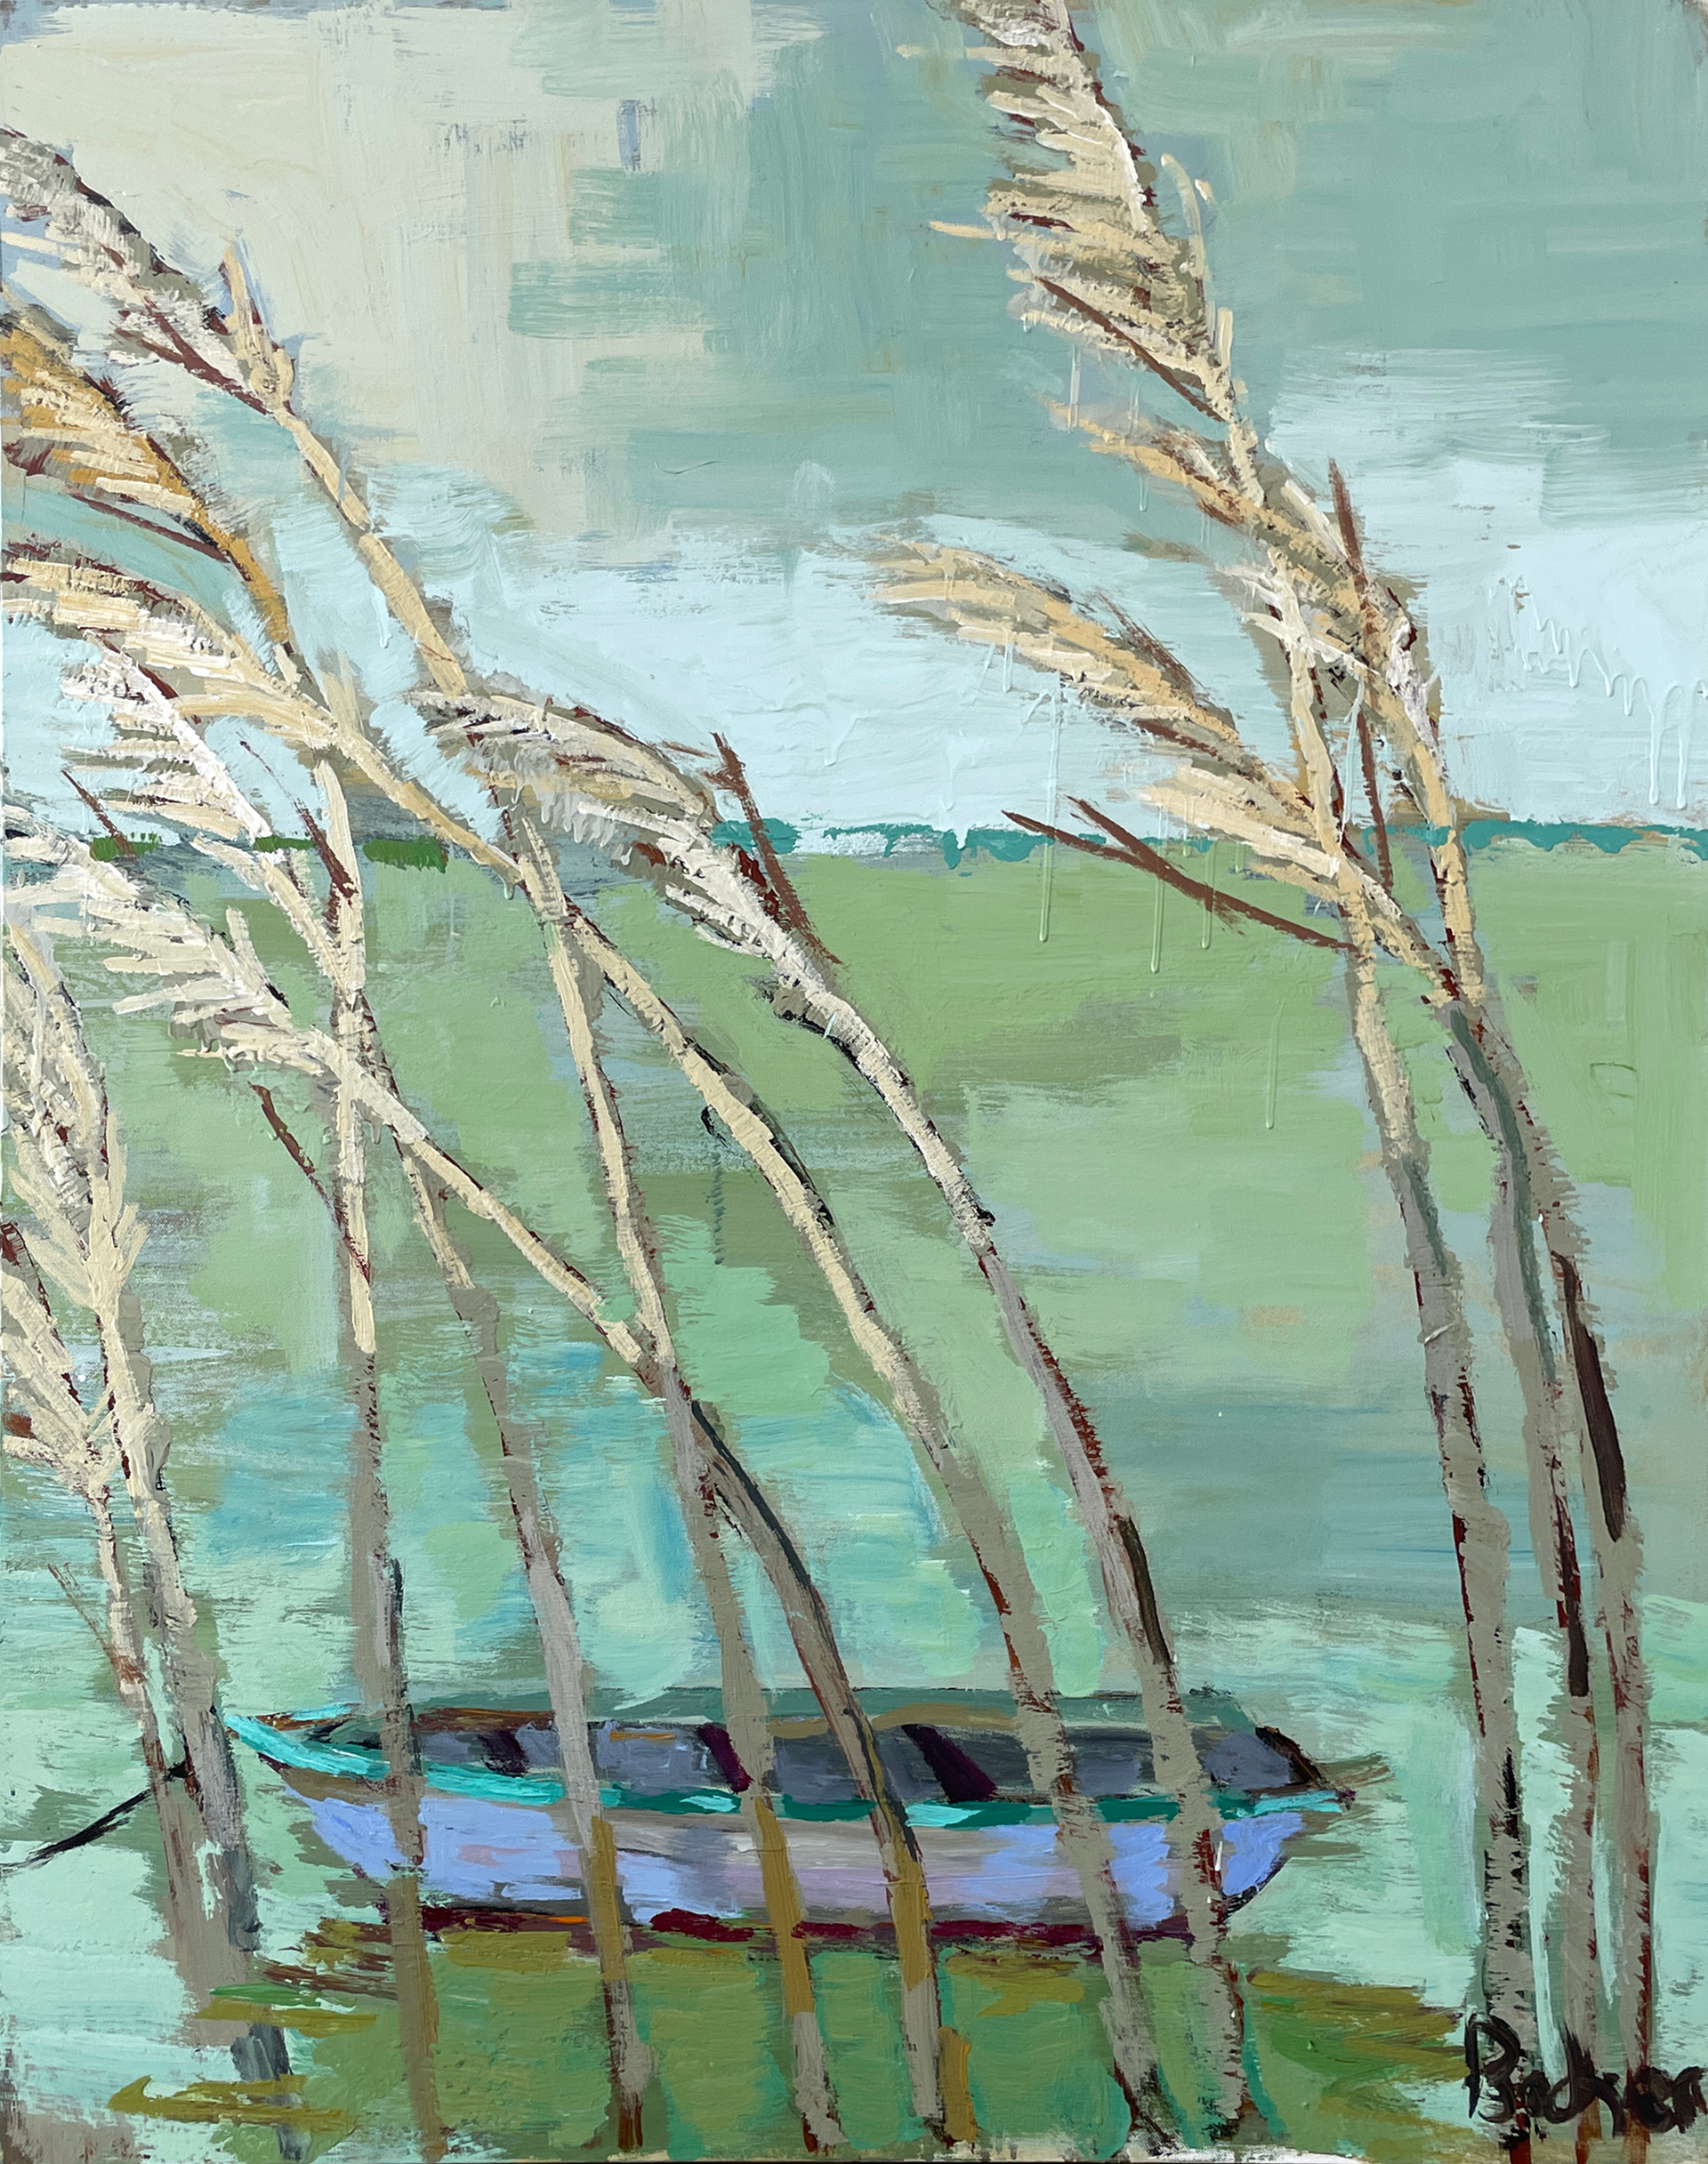 Wind in the Reeds by Gary Bodner